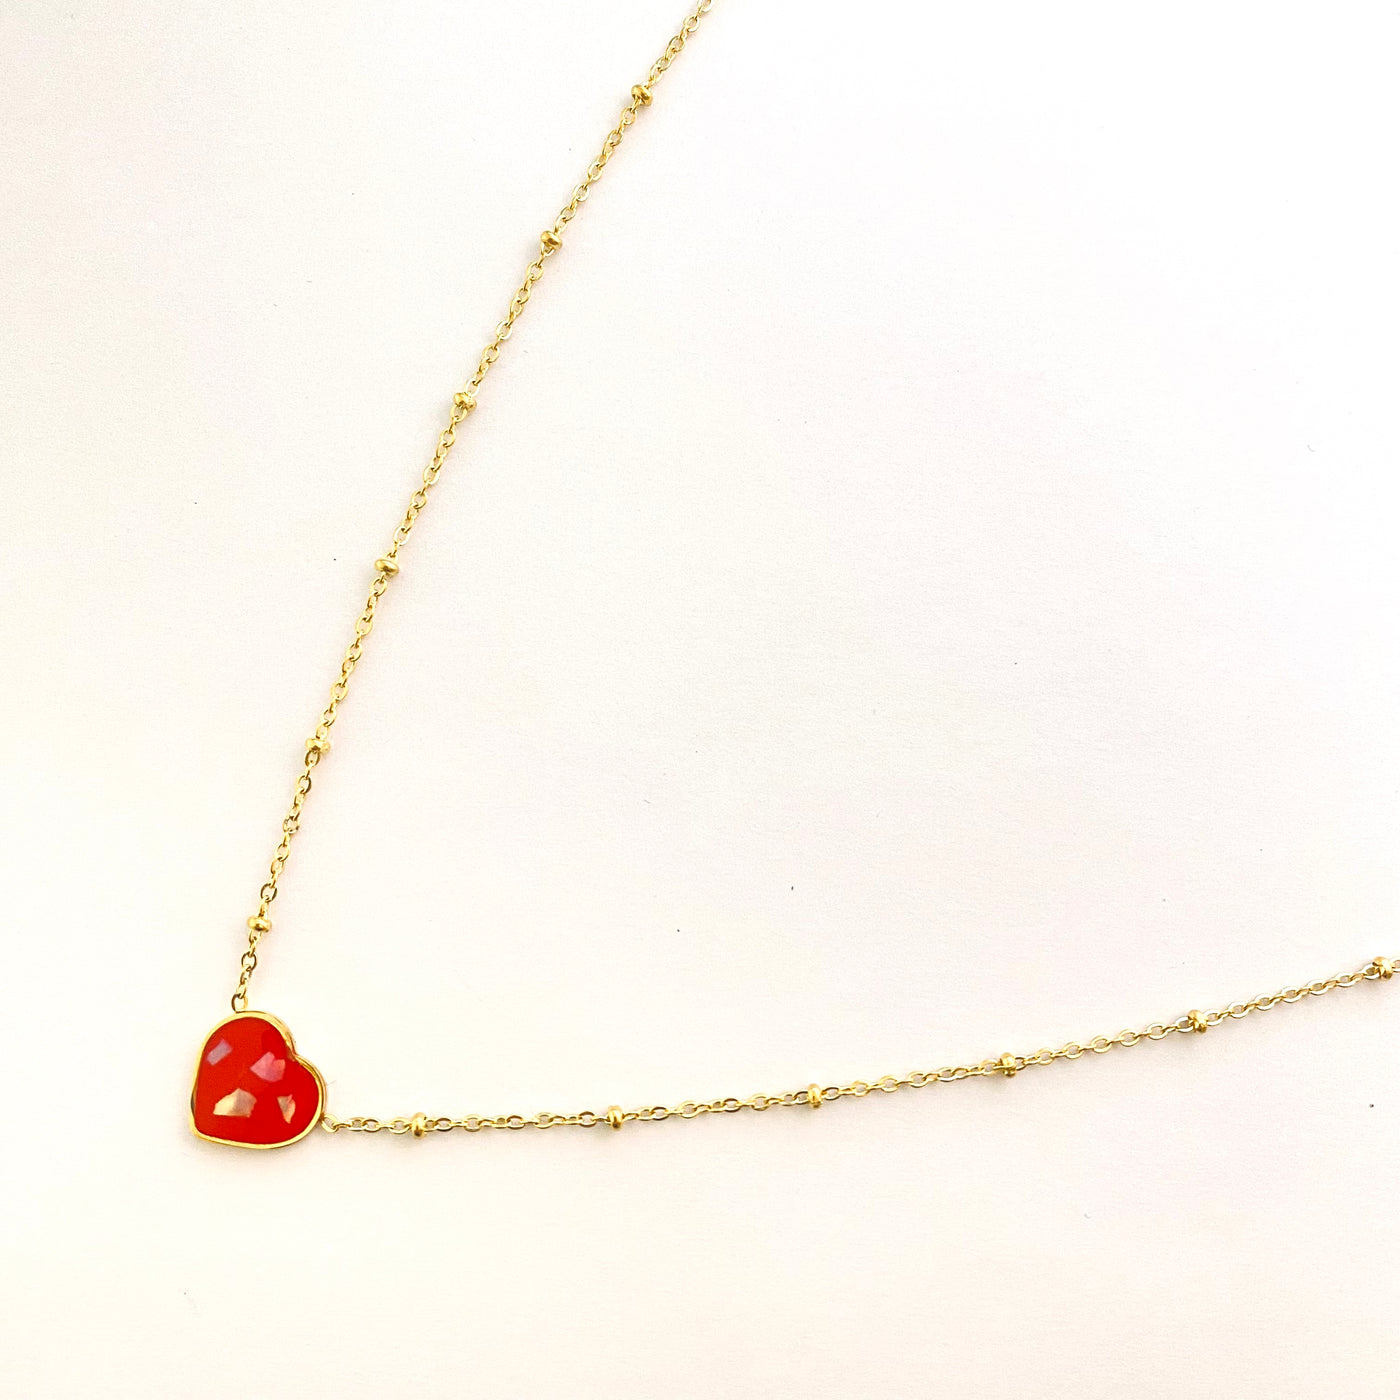 LOVE - Collier plaqué or